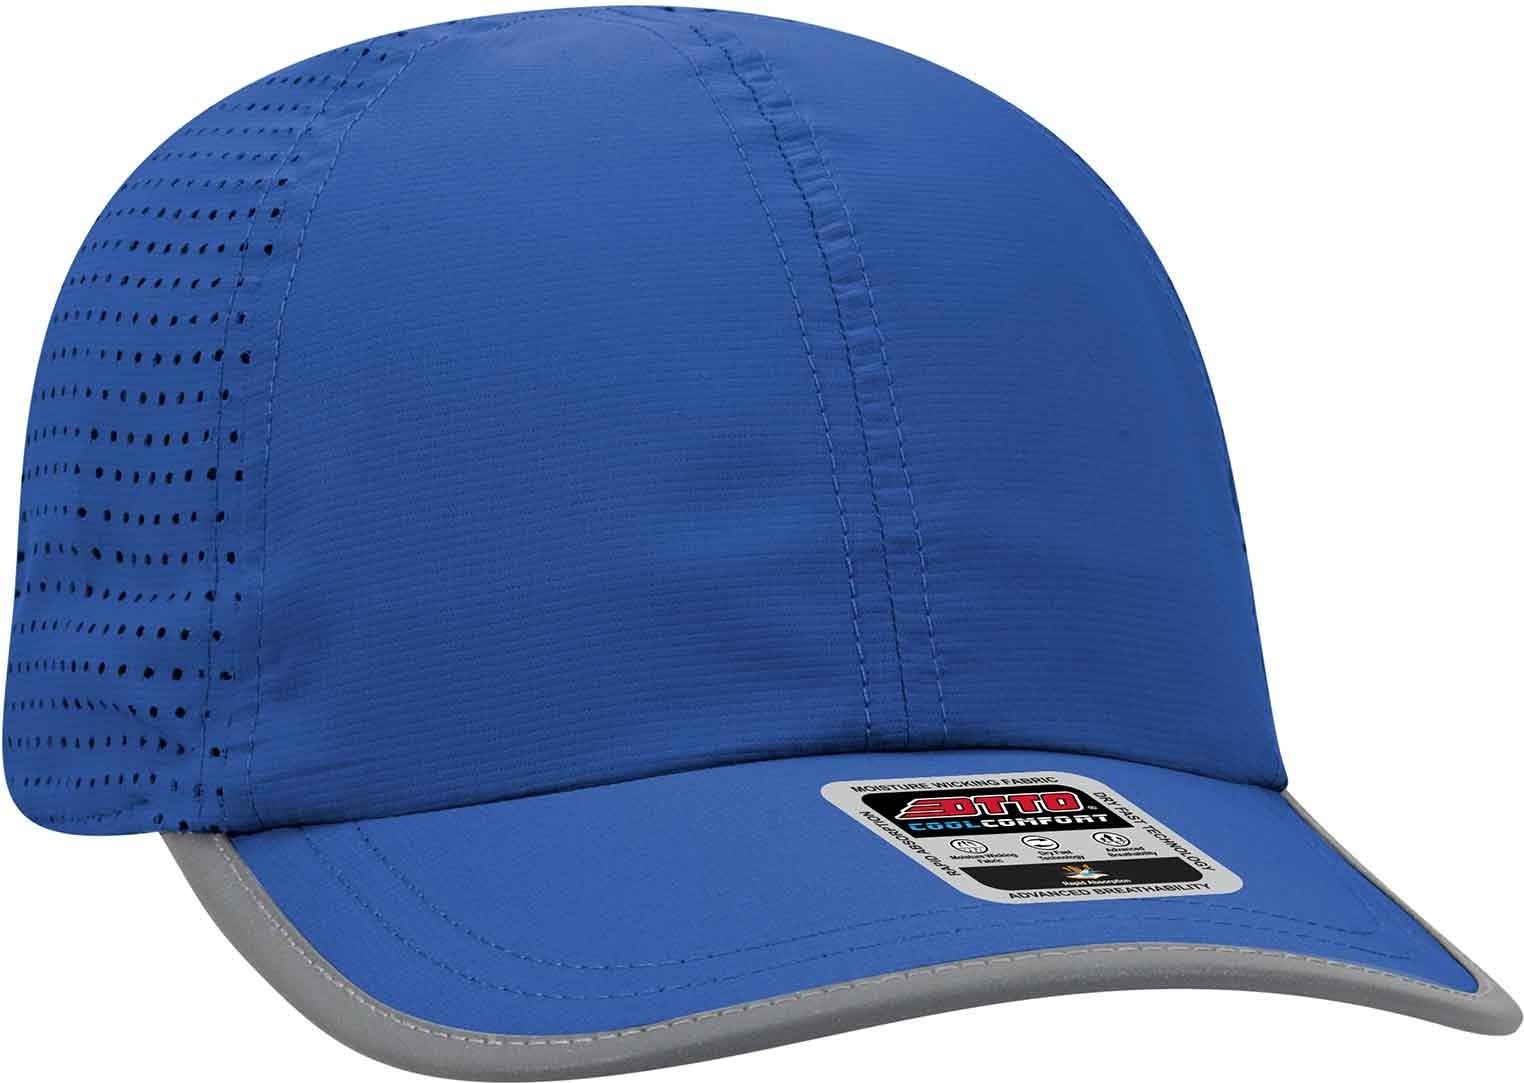 OTTO 133-1258 6 Panel Textured Polyester Pongee with Mesh Inserts Reflective Sandwich Visor Running Cap - Royal - HIT a Double - 1